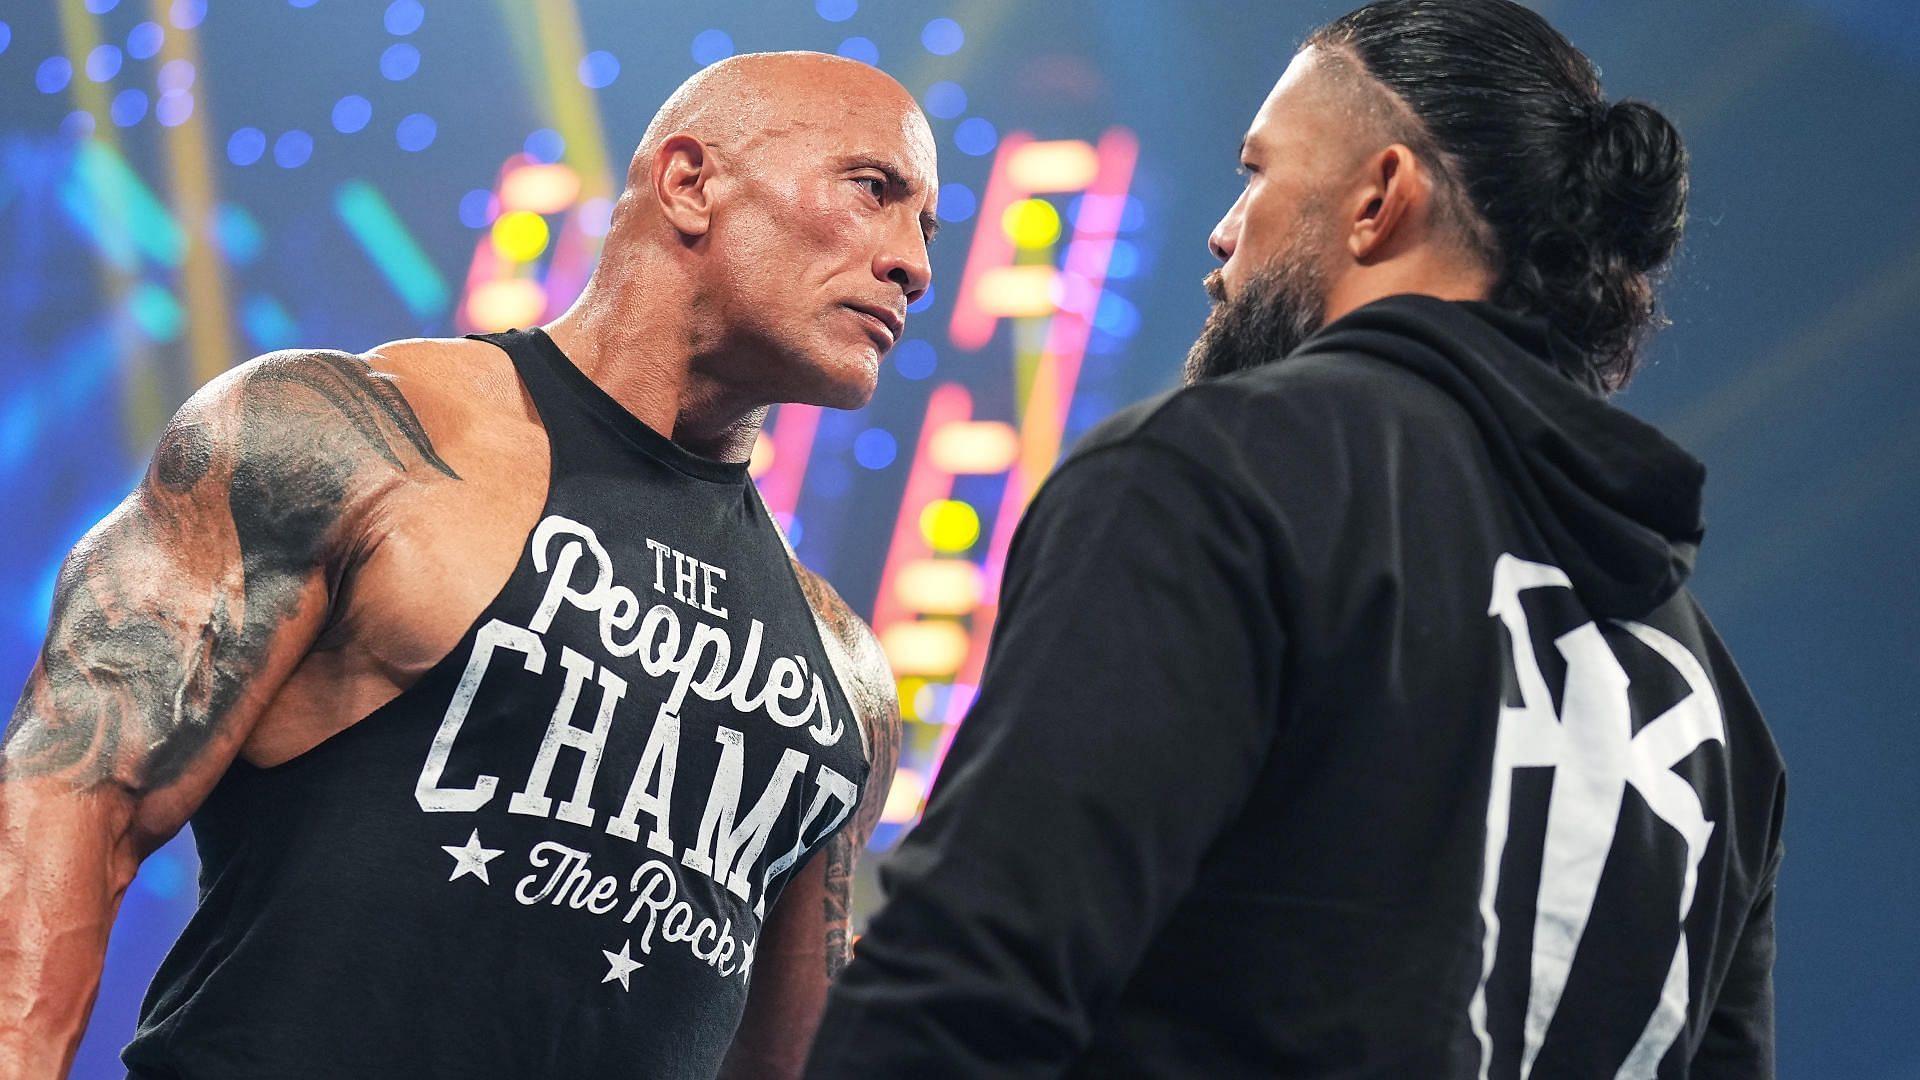 The Rock came back to WWE SmackDown this week